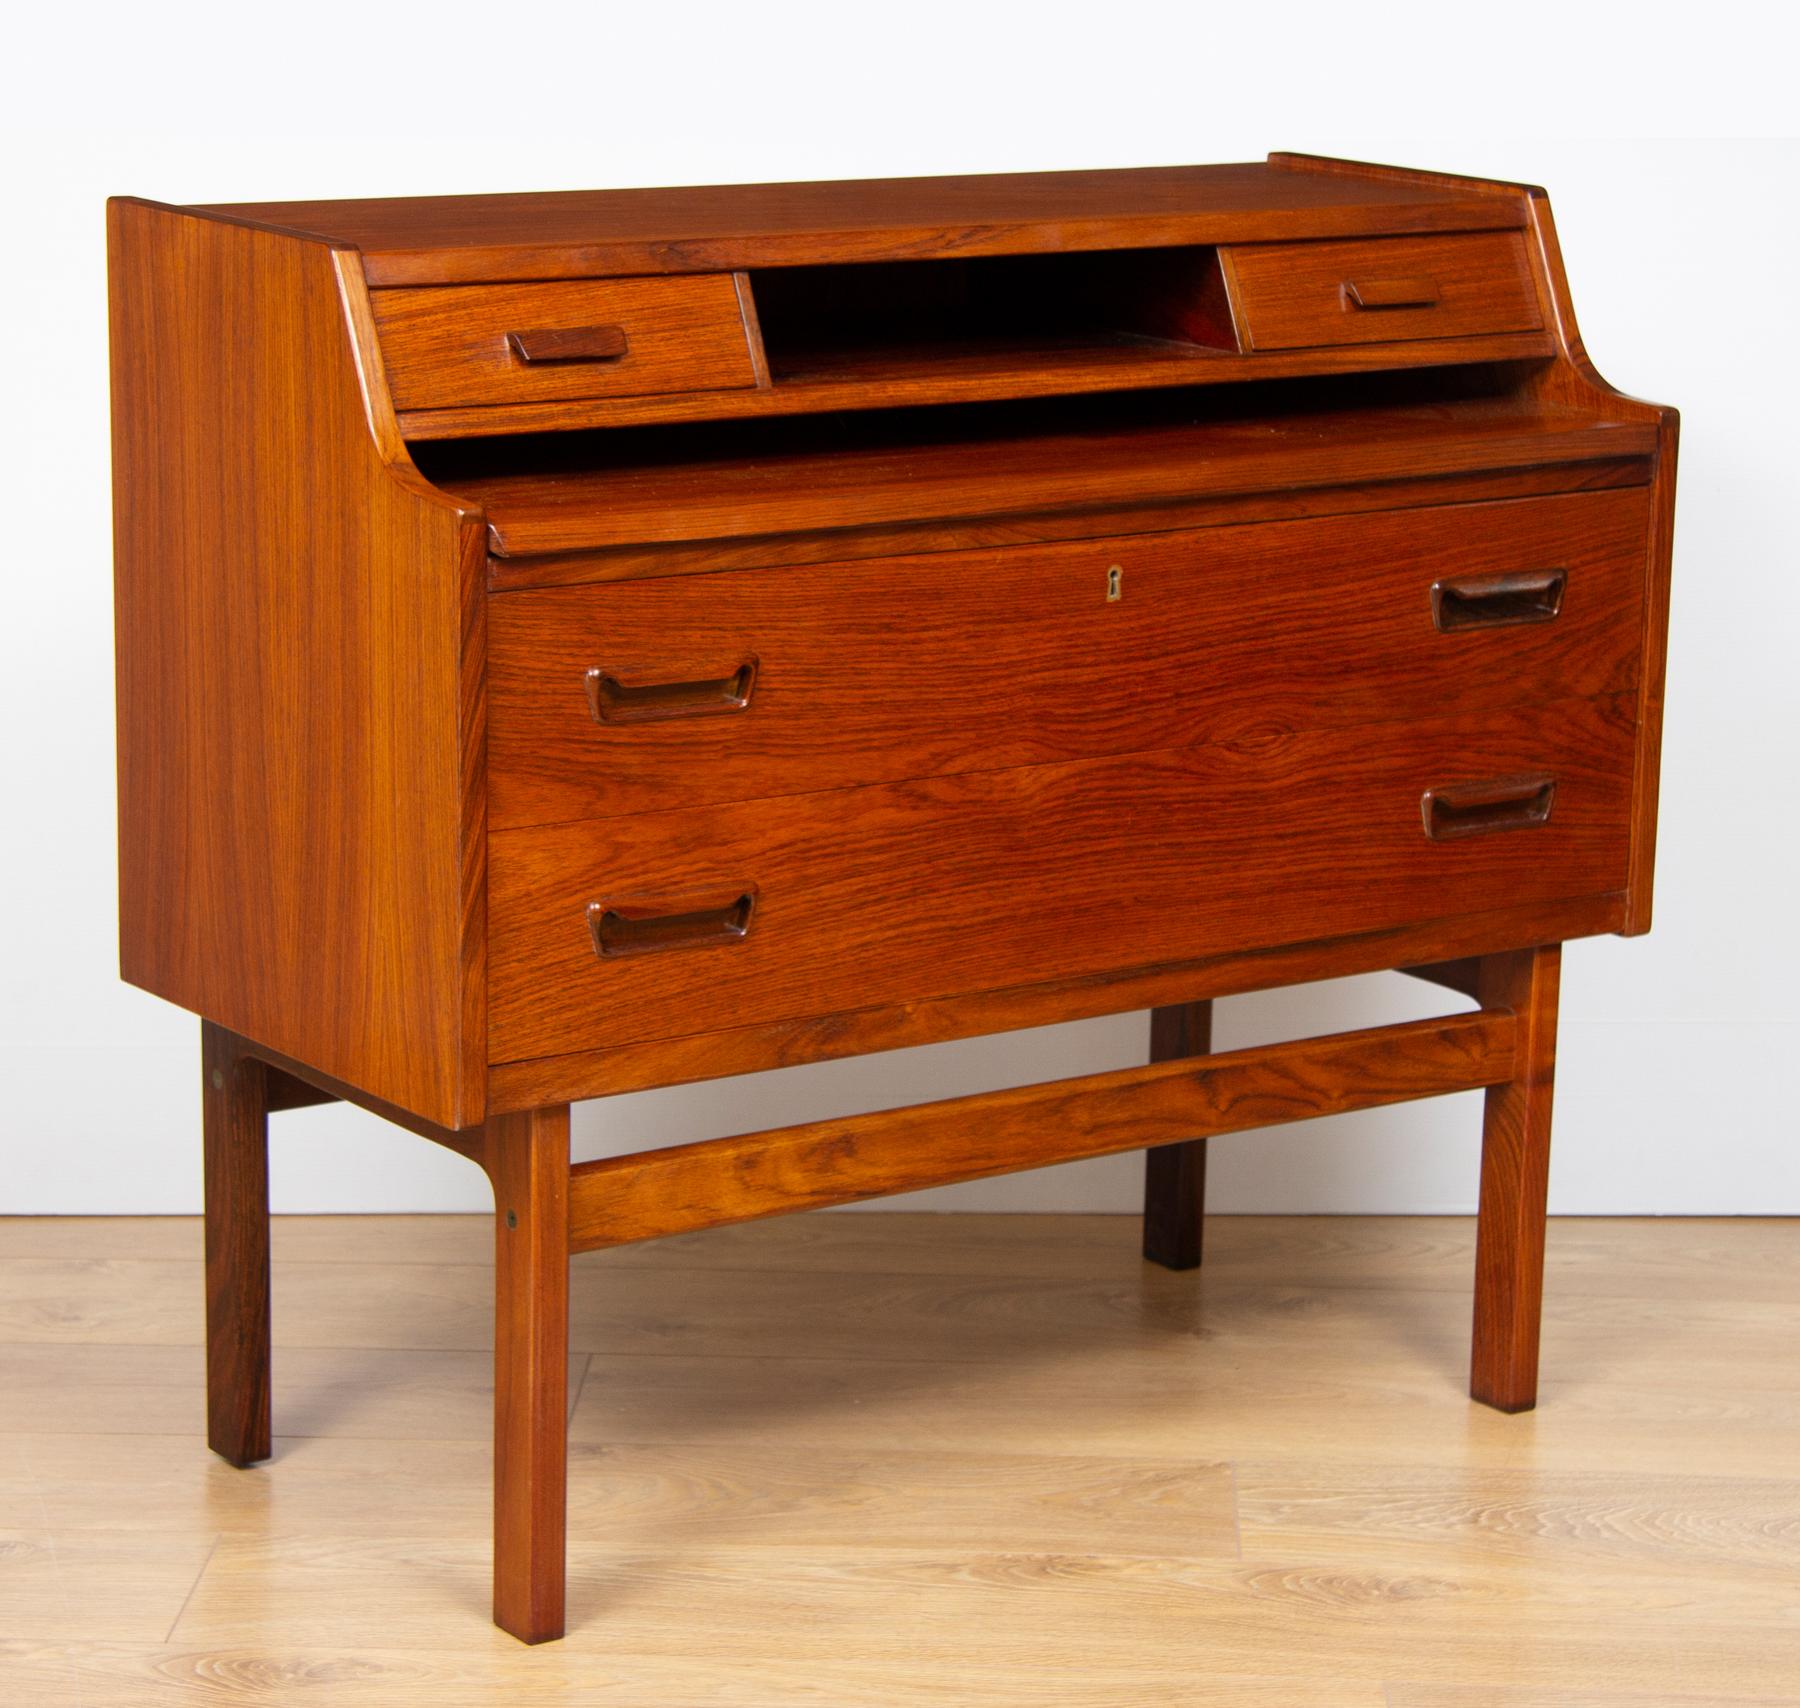 Midcentury desk designed by Arne Wahl Iversen and manufactured by Vinde Møbelfabrik in Denmark in the 1960s. 2 long drawers, 2 small drawers and a retractable writing surface.